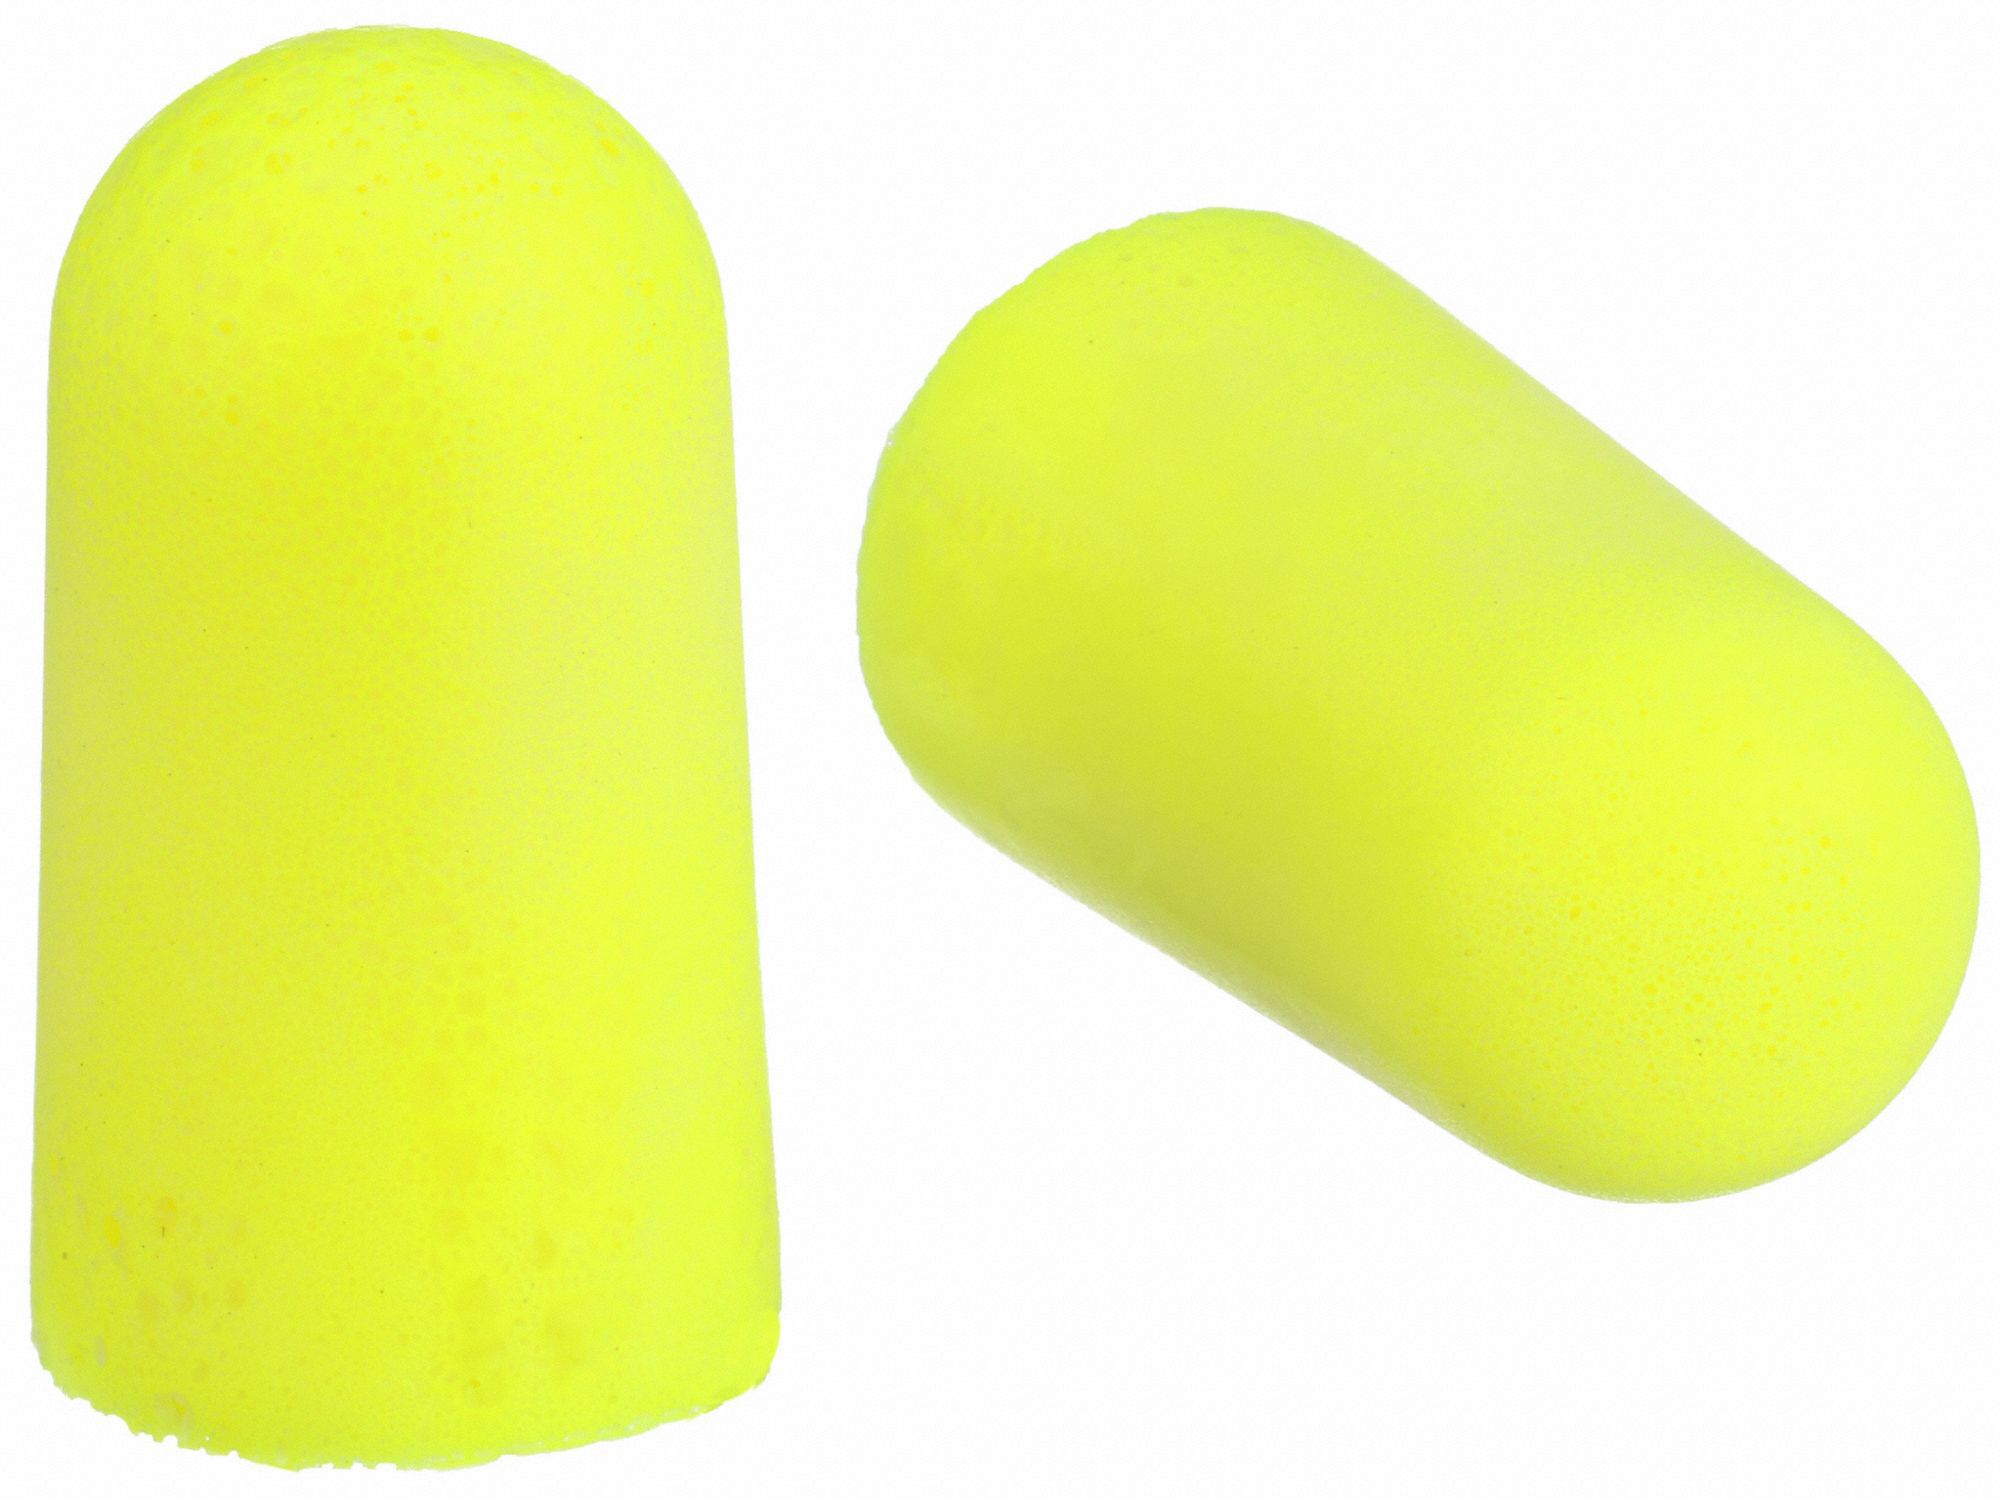 100 Pair Uncorded Ear Plugs 33dB Rated Bullet Shape 3M® 390-1250 Refill 